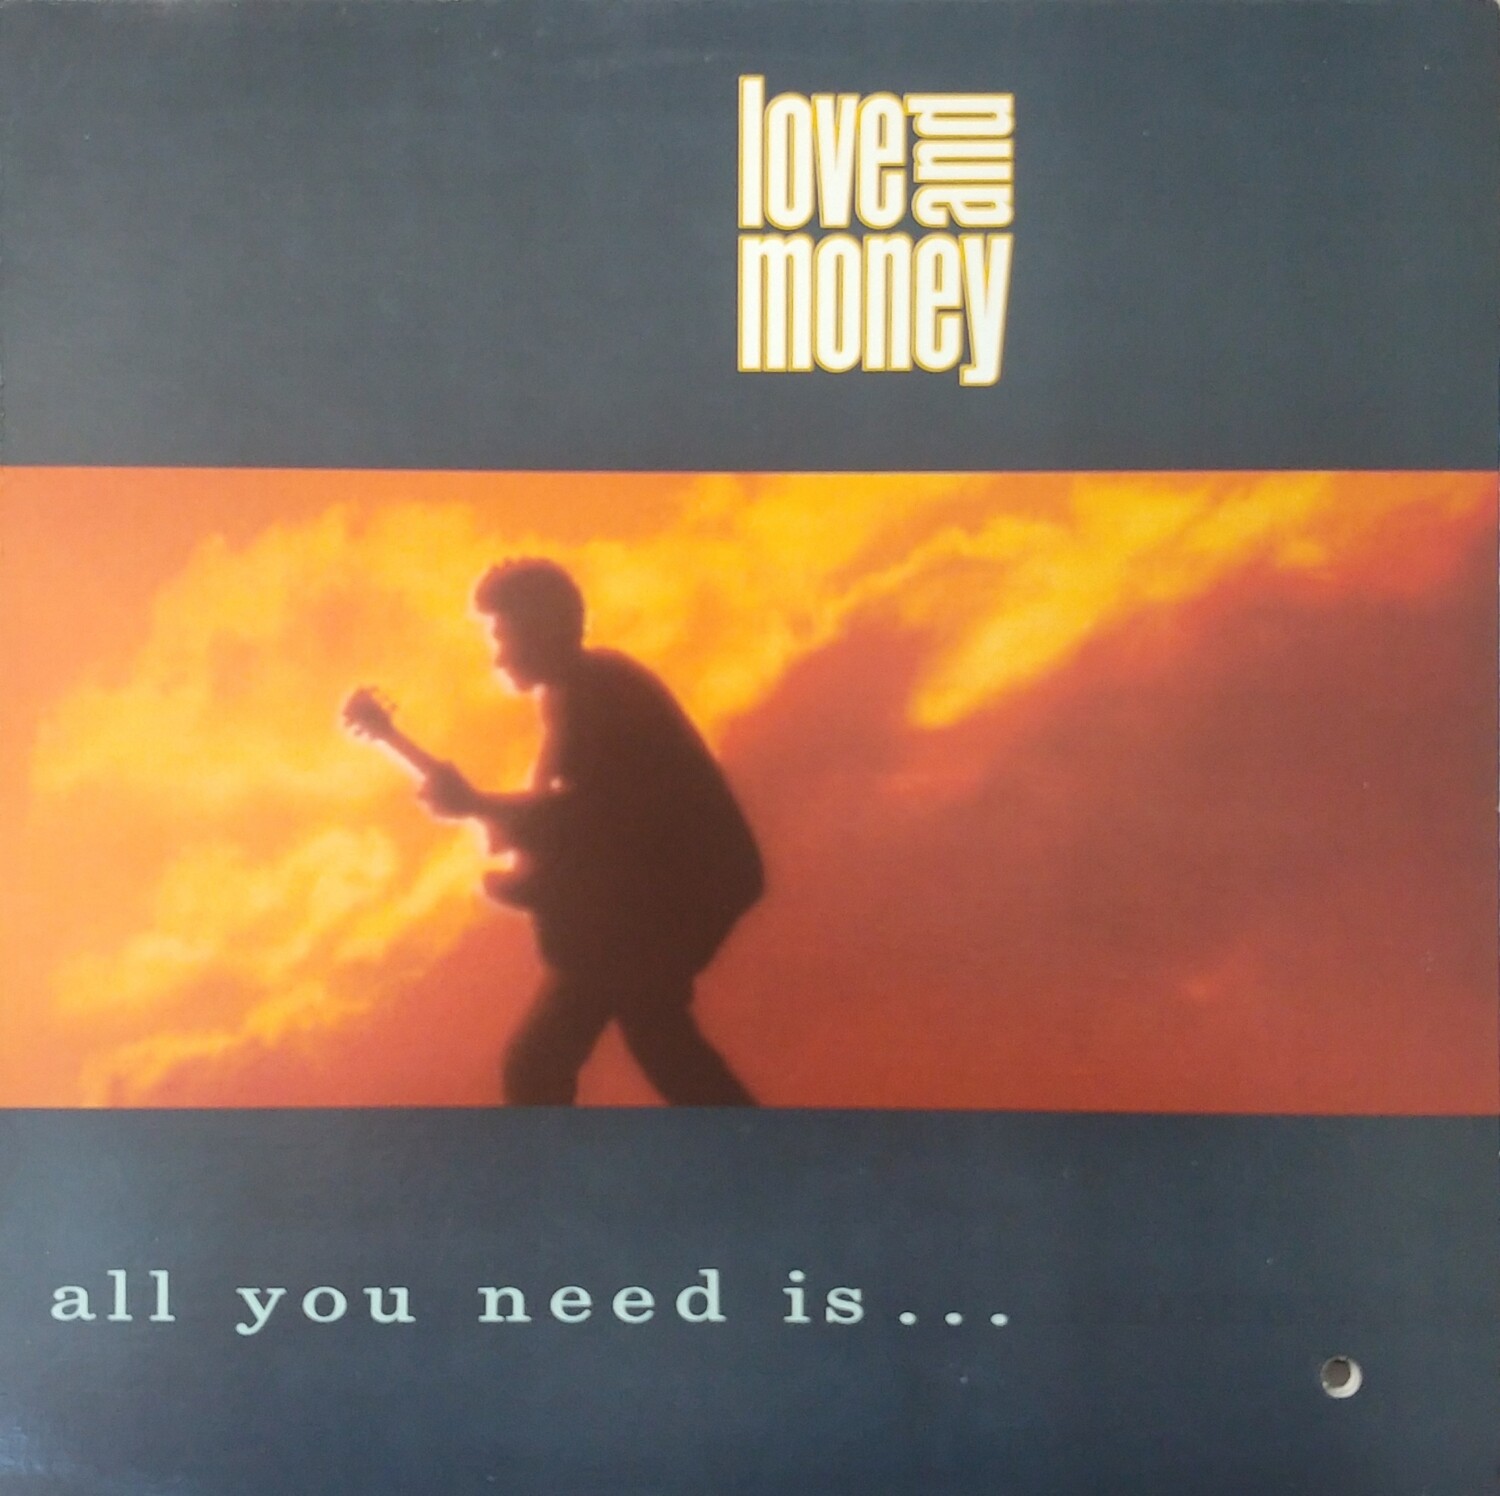 Love and Money - All you need is